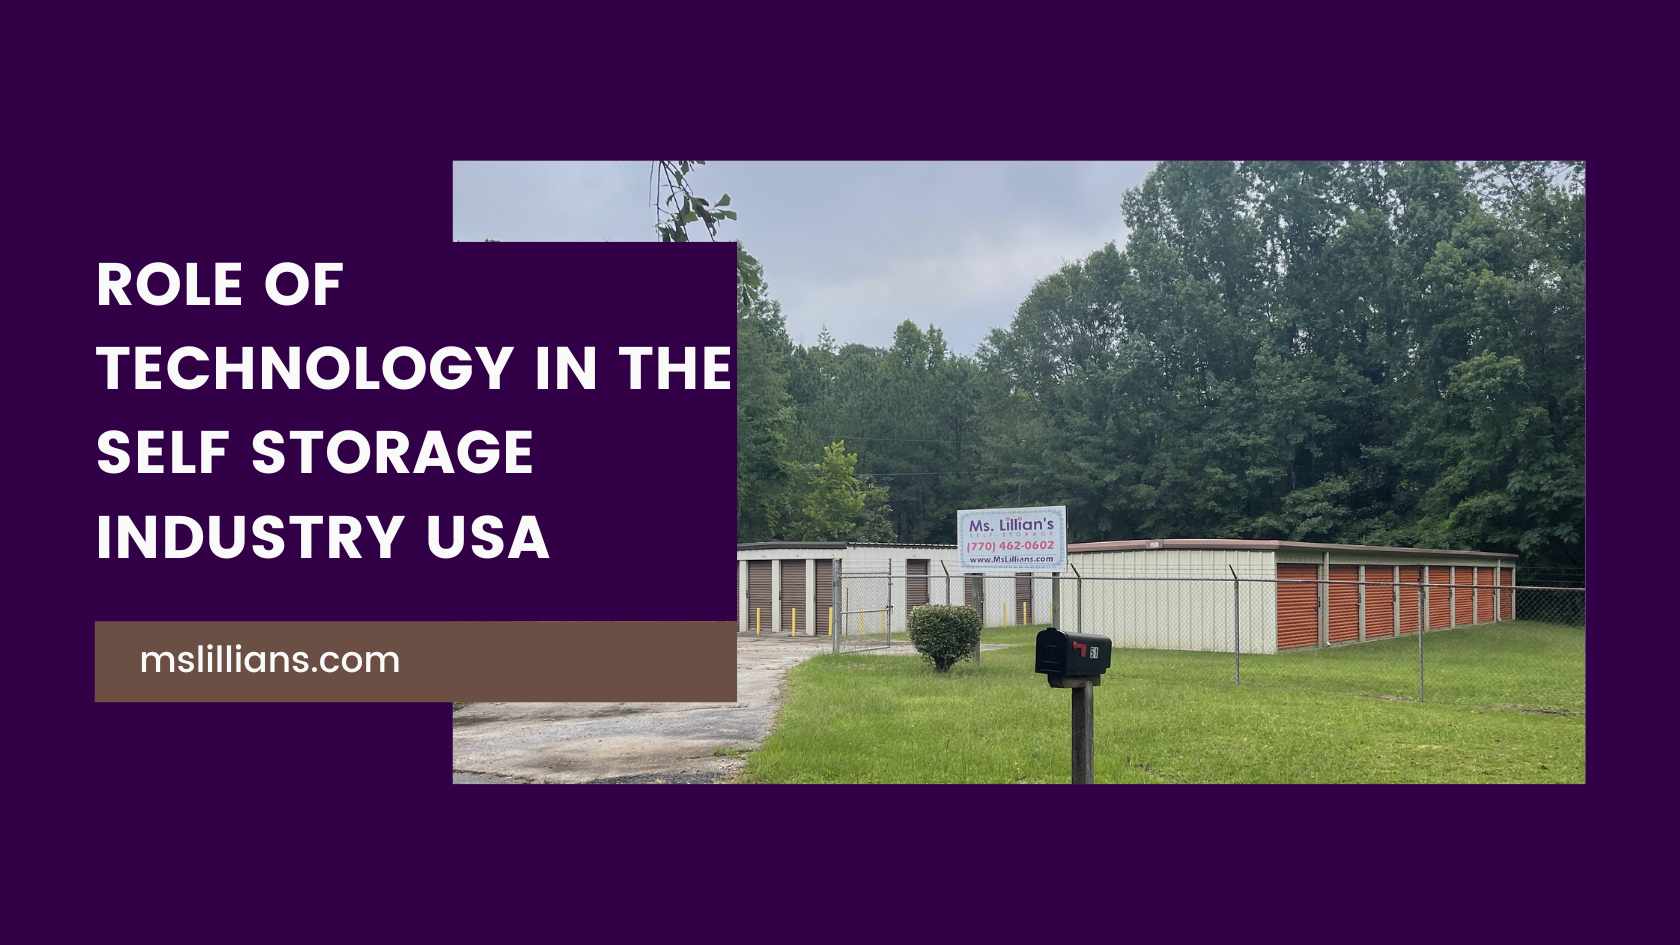 Role of Technology in the Self Storage Industry USA